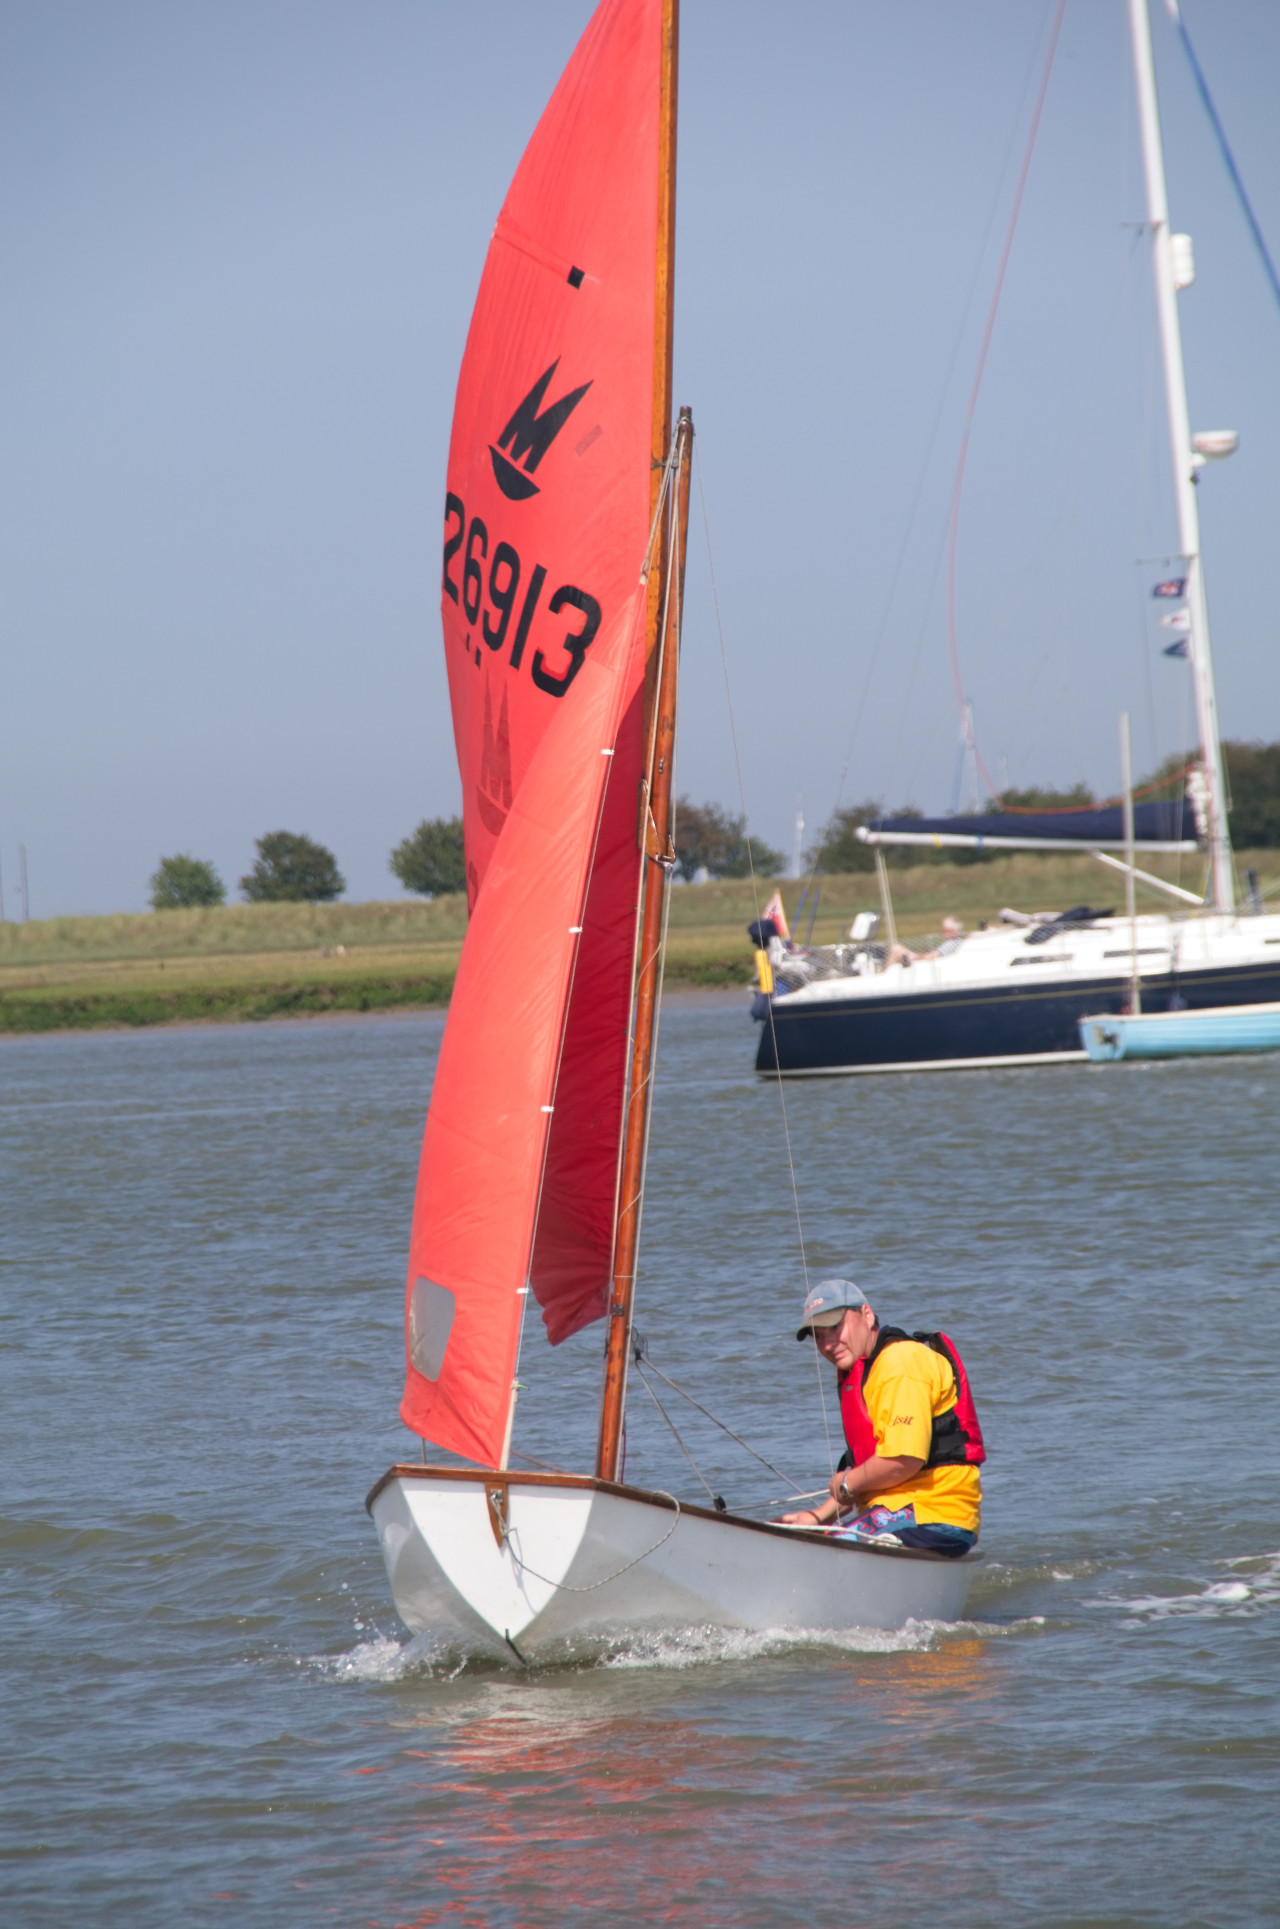 A Mirror dinghy being sailed singlehanded by a gentleman on a river